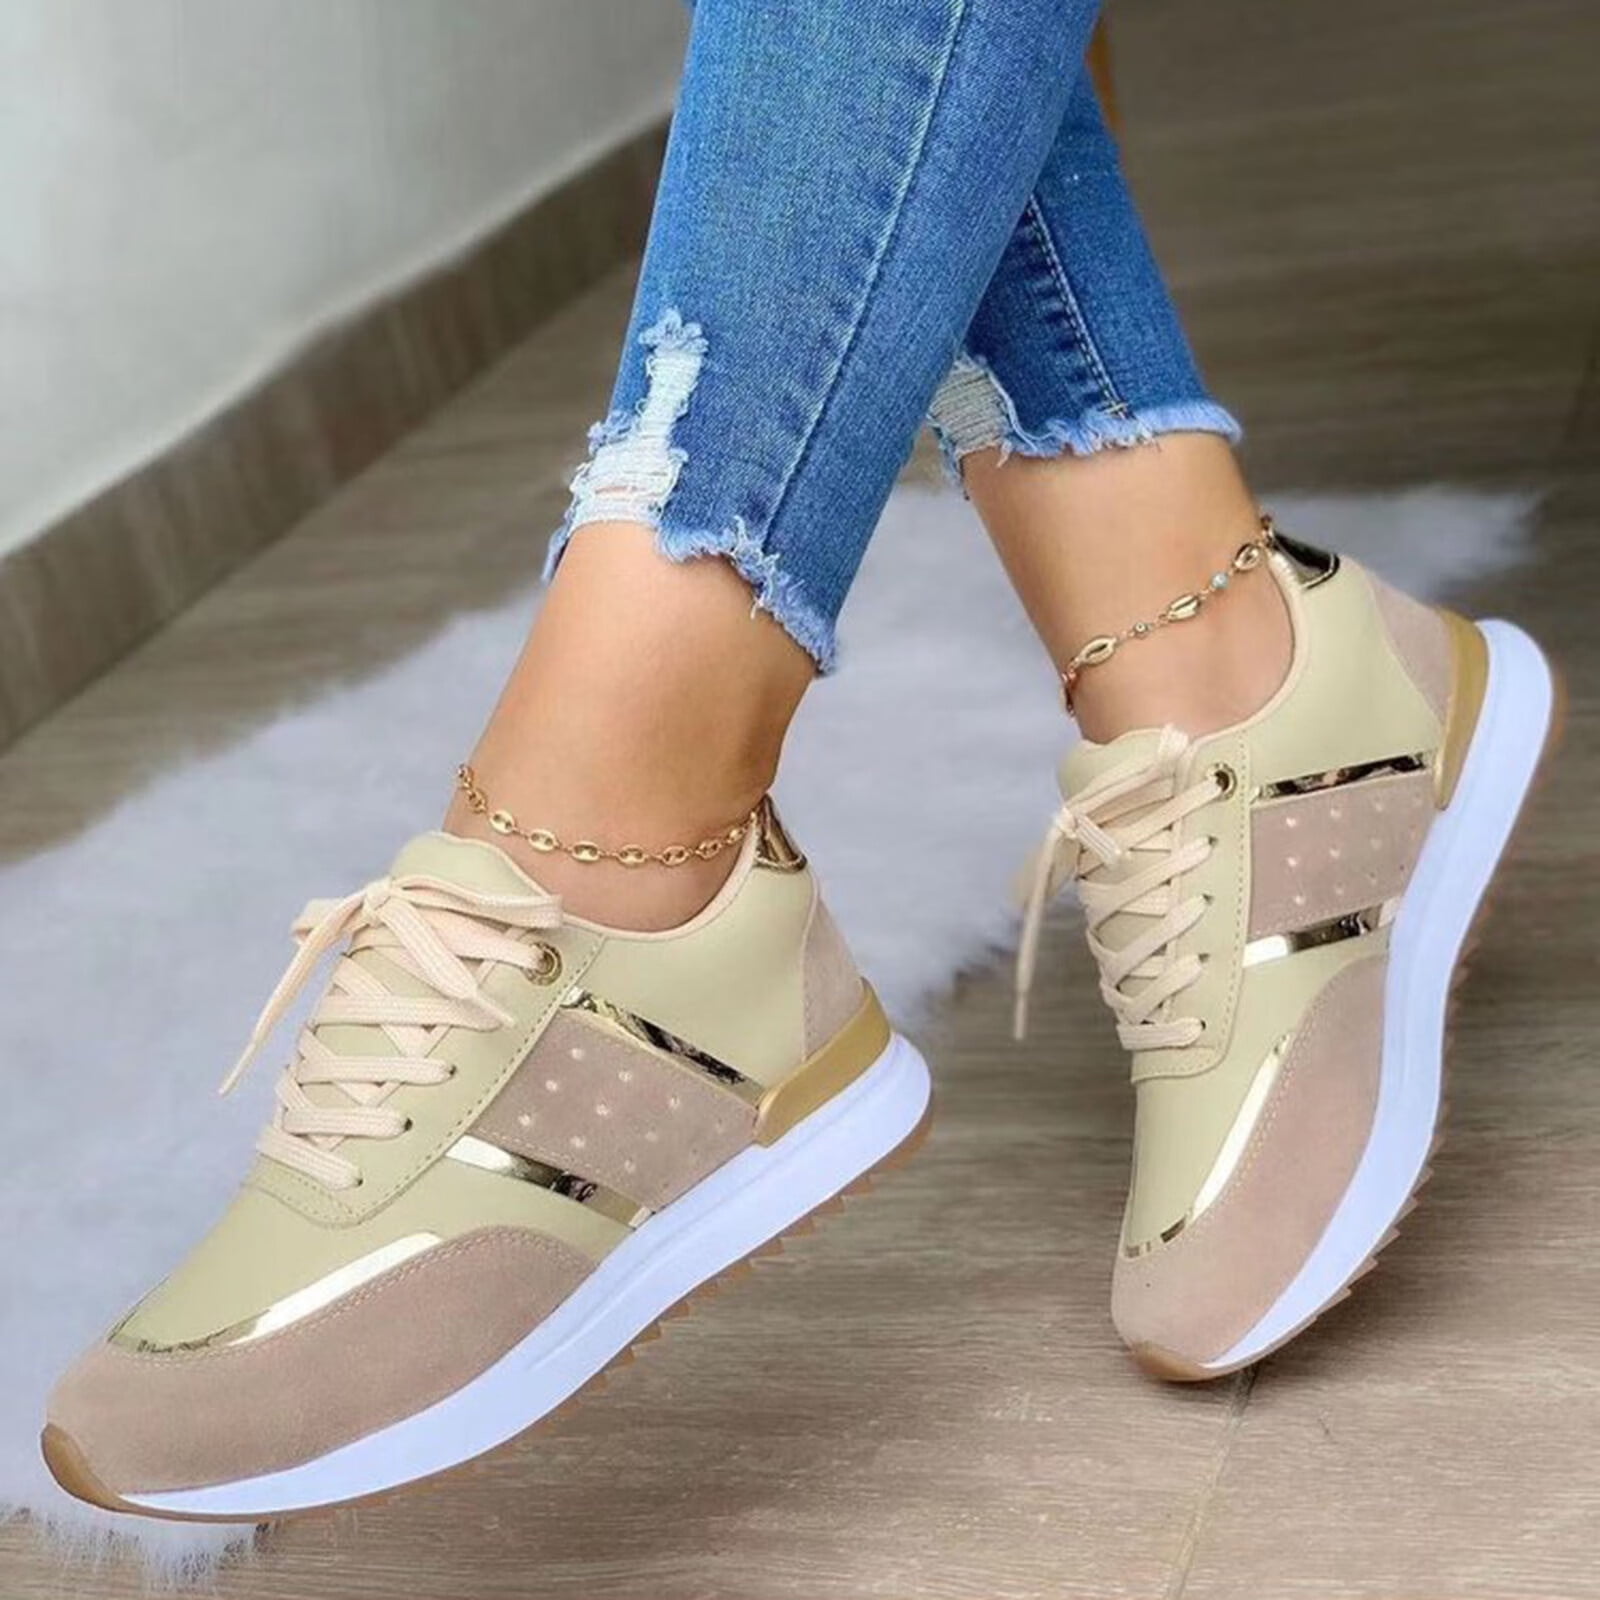 The best color block sneakers to spice up your wardrobe | Well+Good